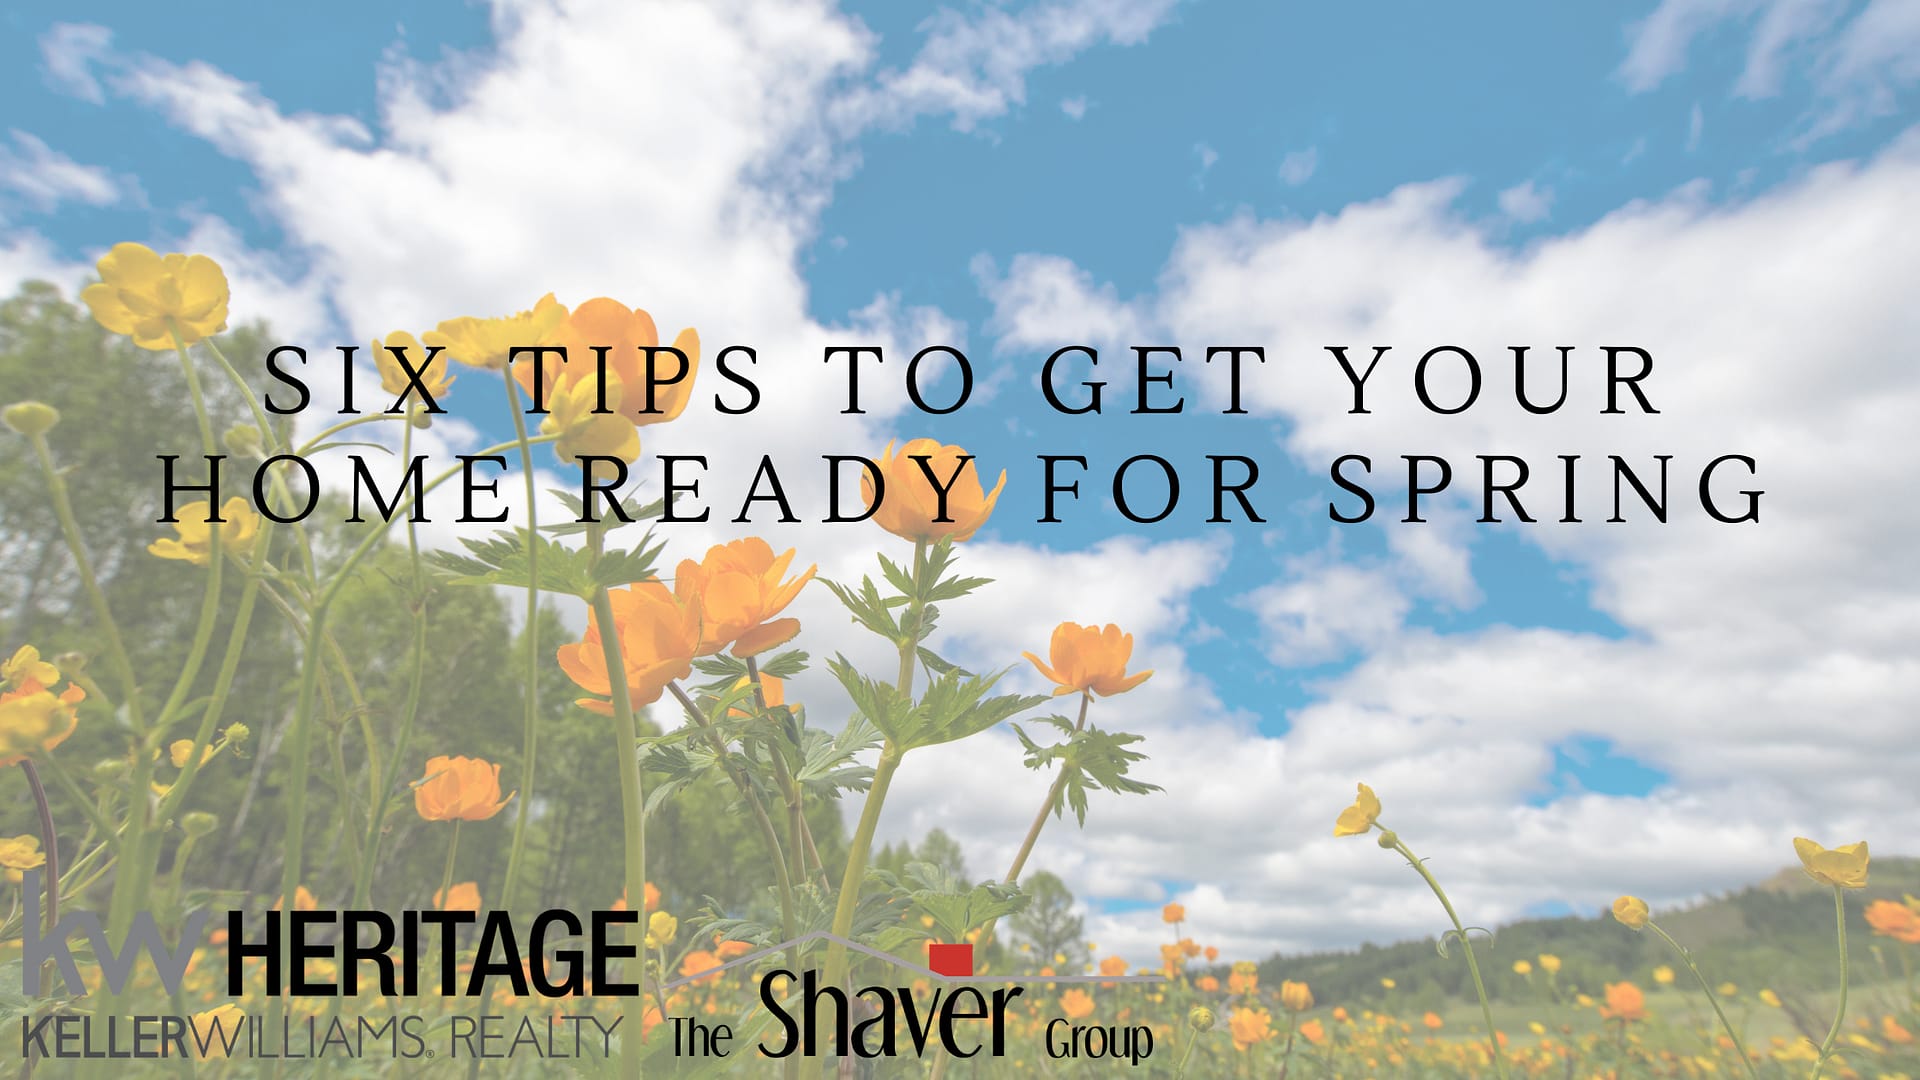 SIX TIPS TO GET YOUR HOME READY FOR SPRING